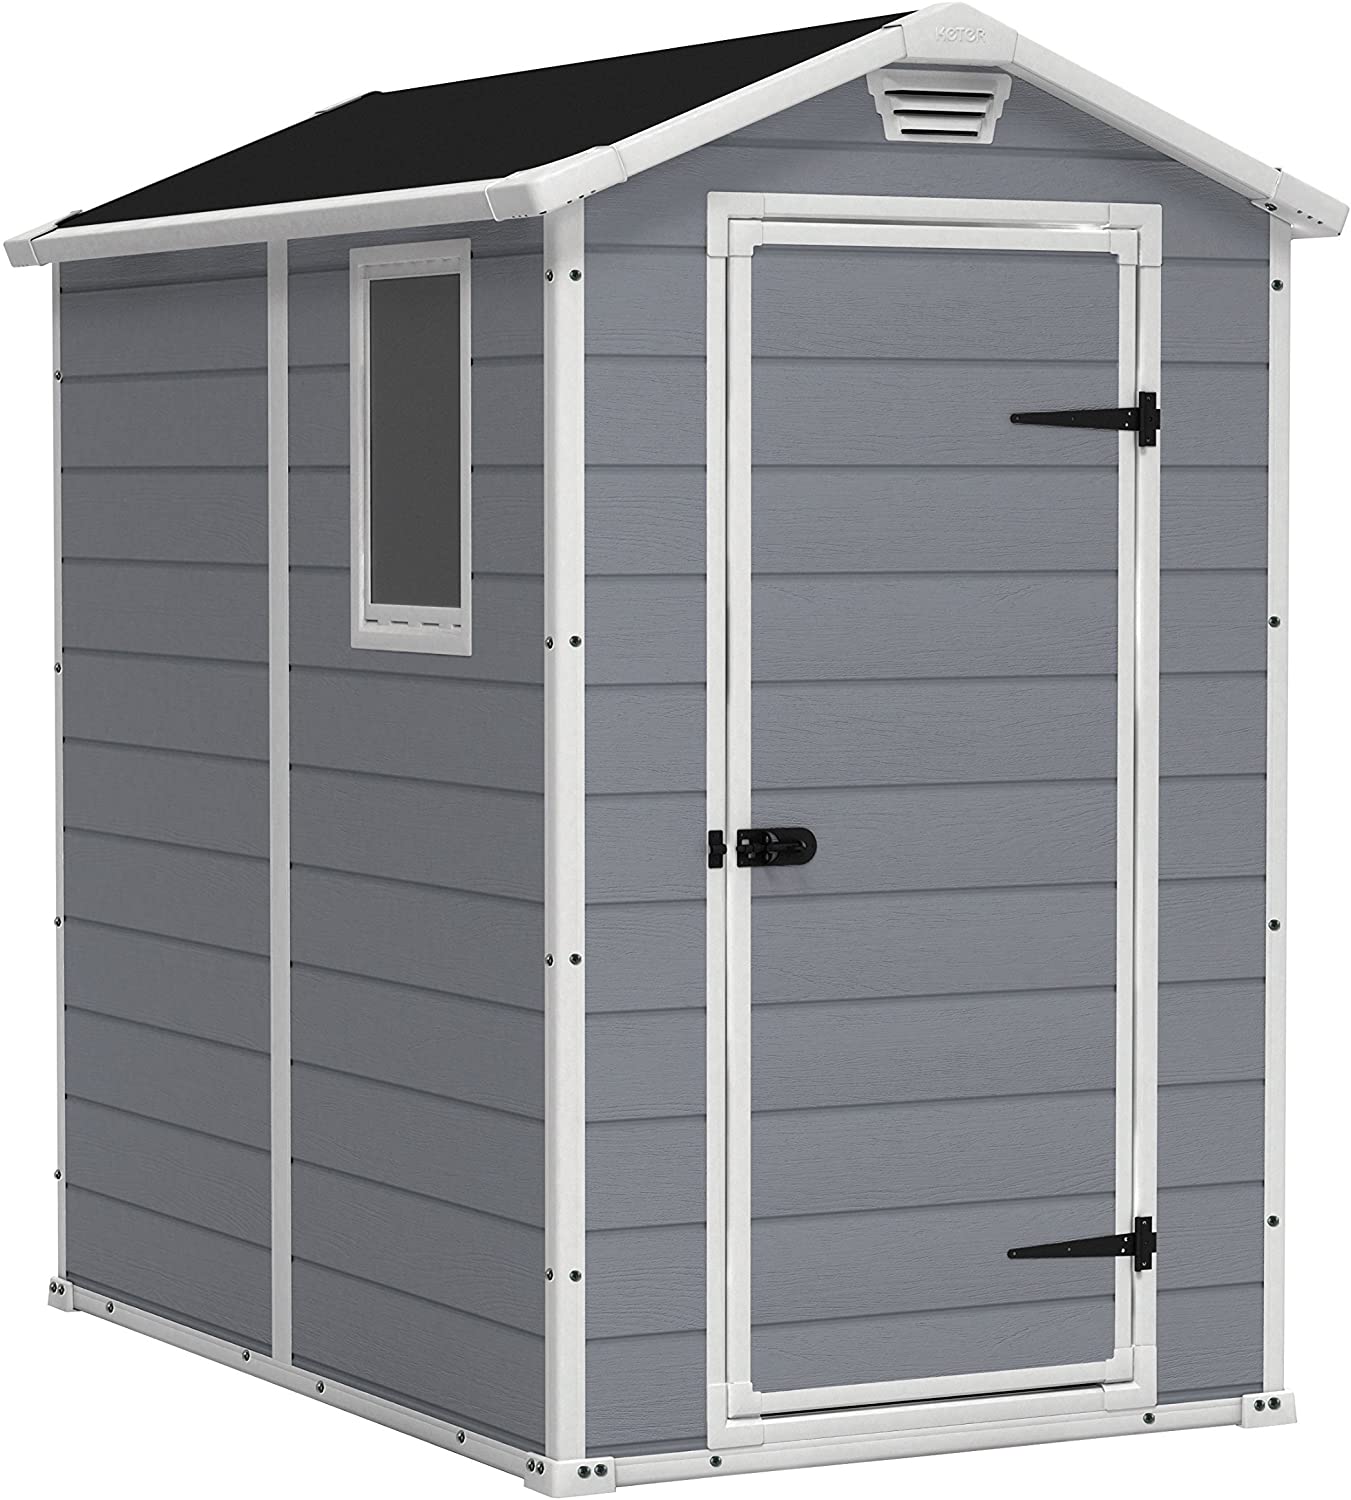 KETER Manor 4x6 Resin Outdoor Storage Shed  $387